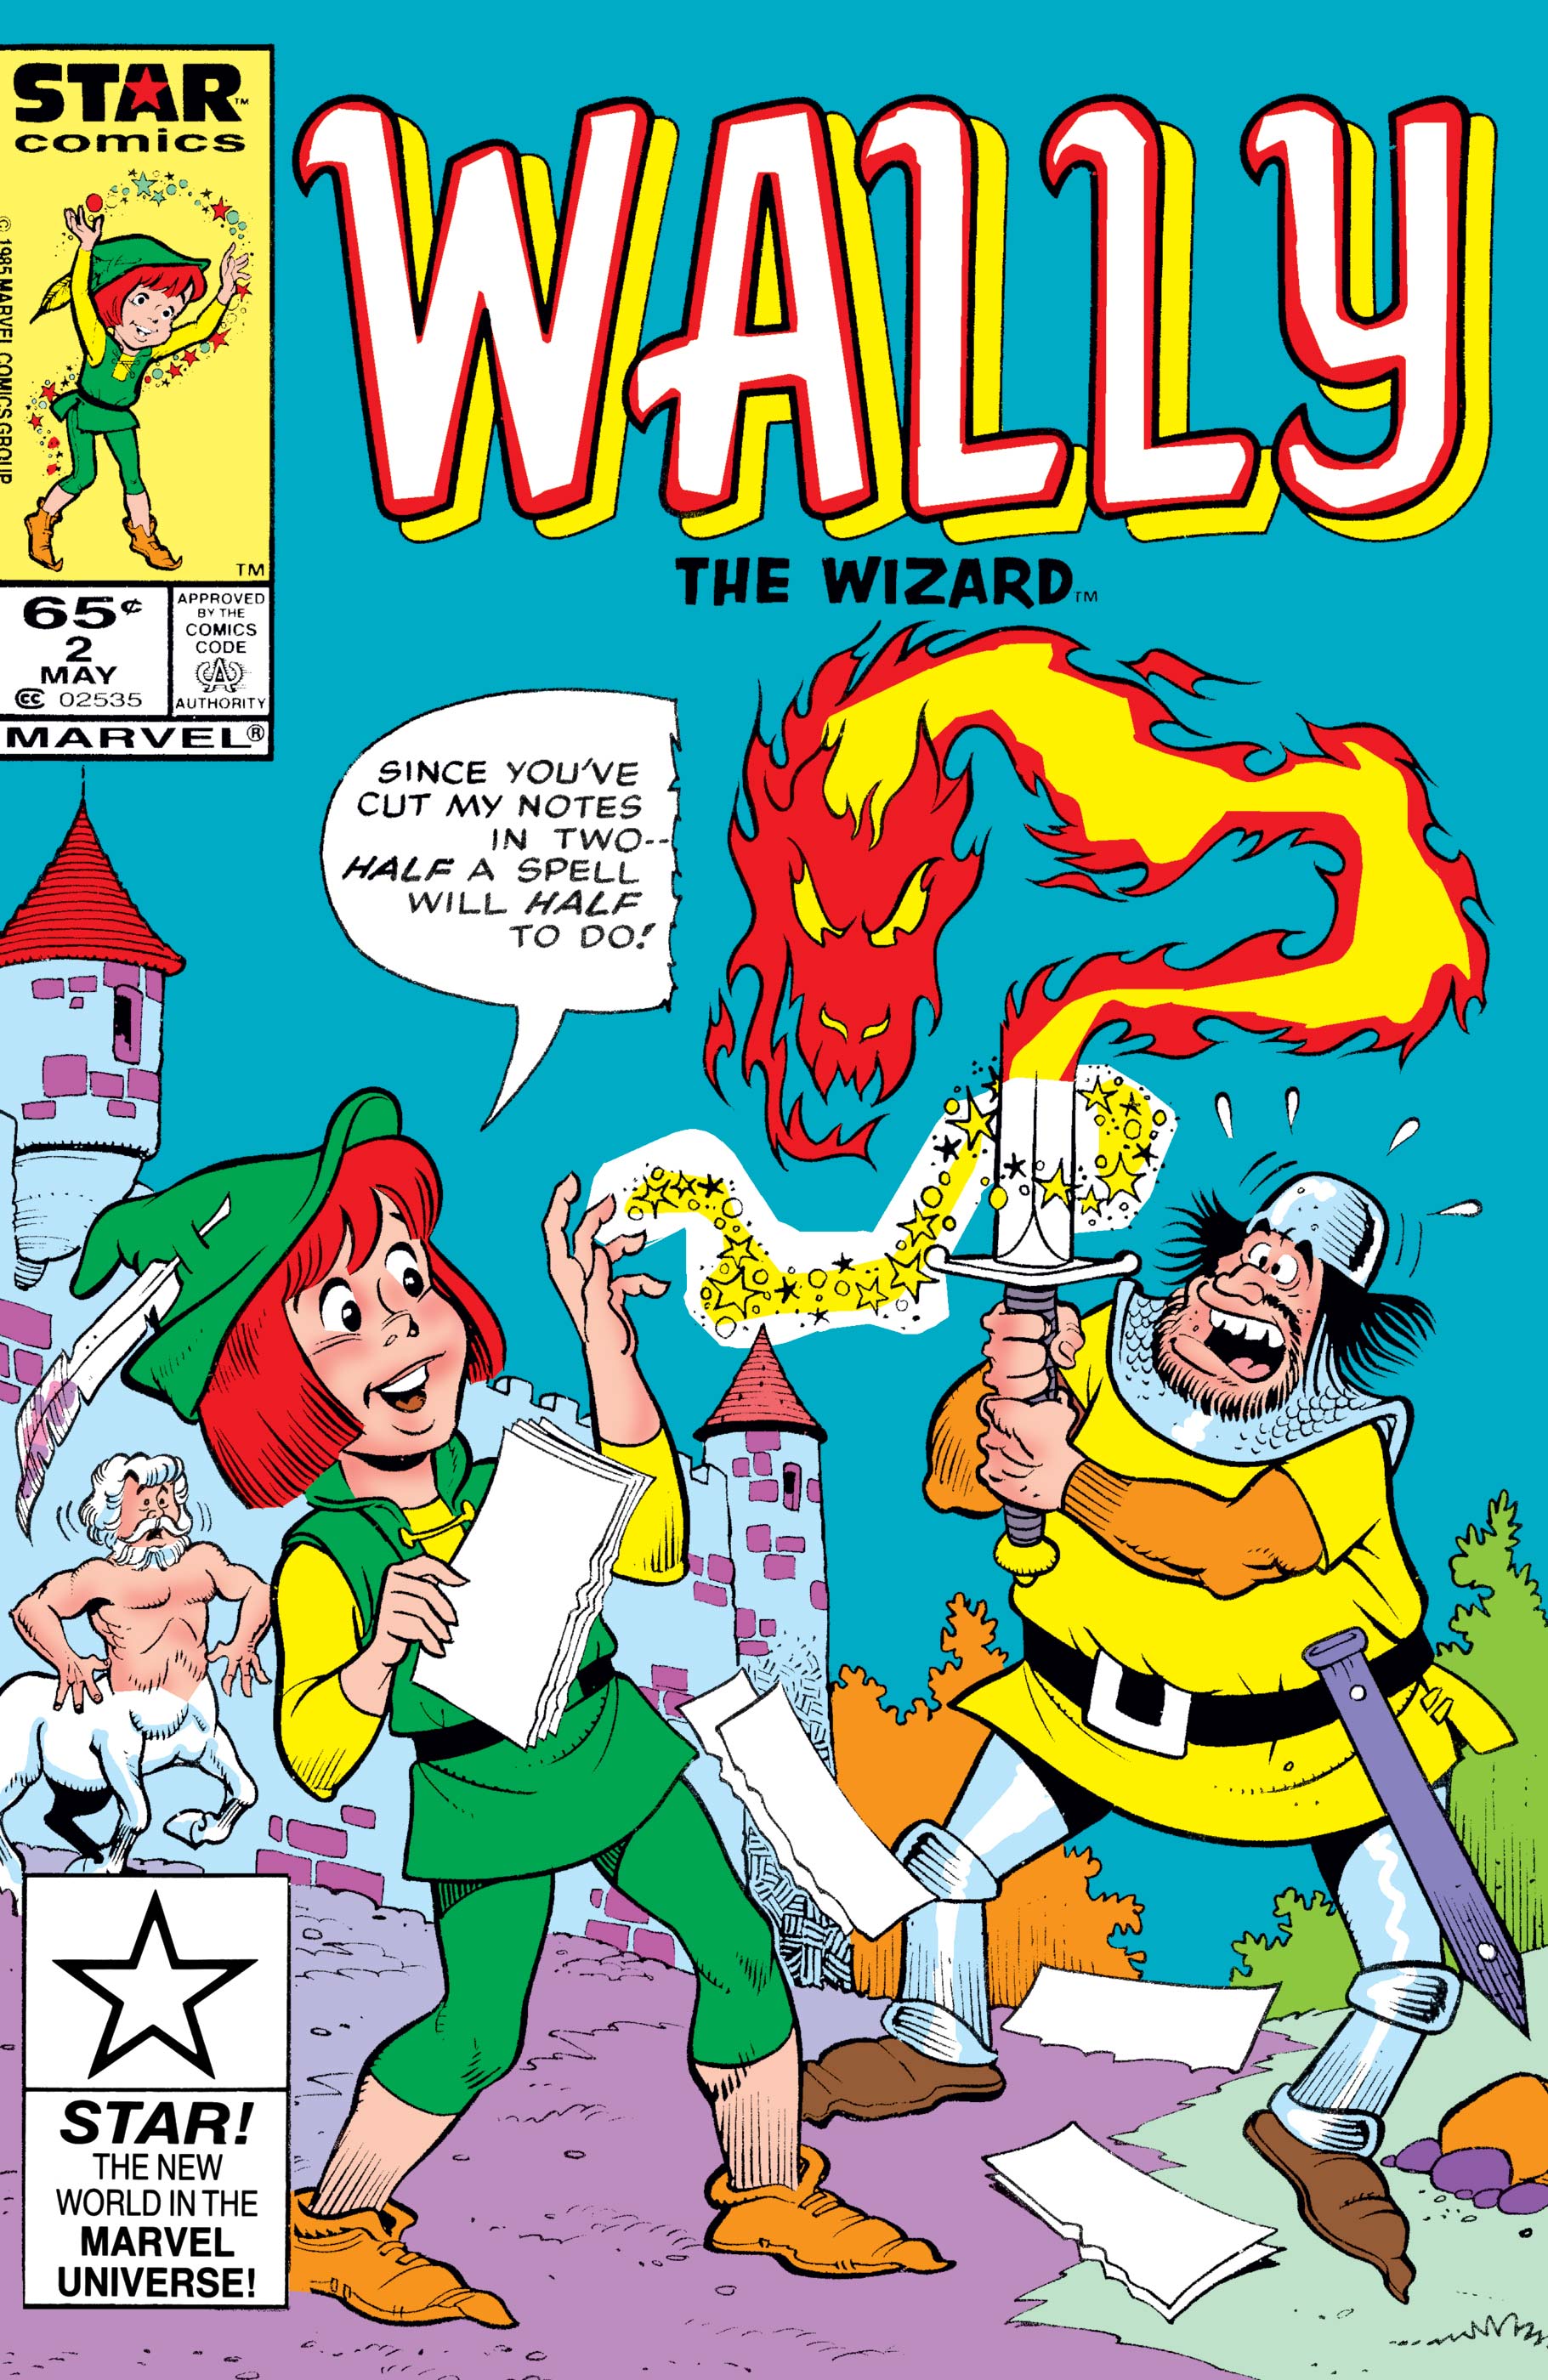 Wally the Wizard (1985) #2